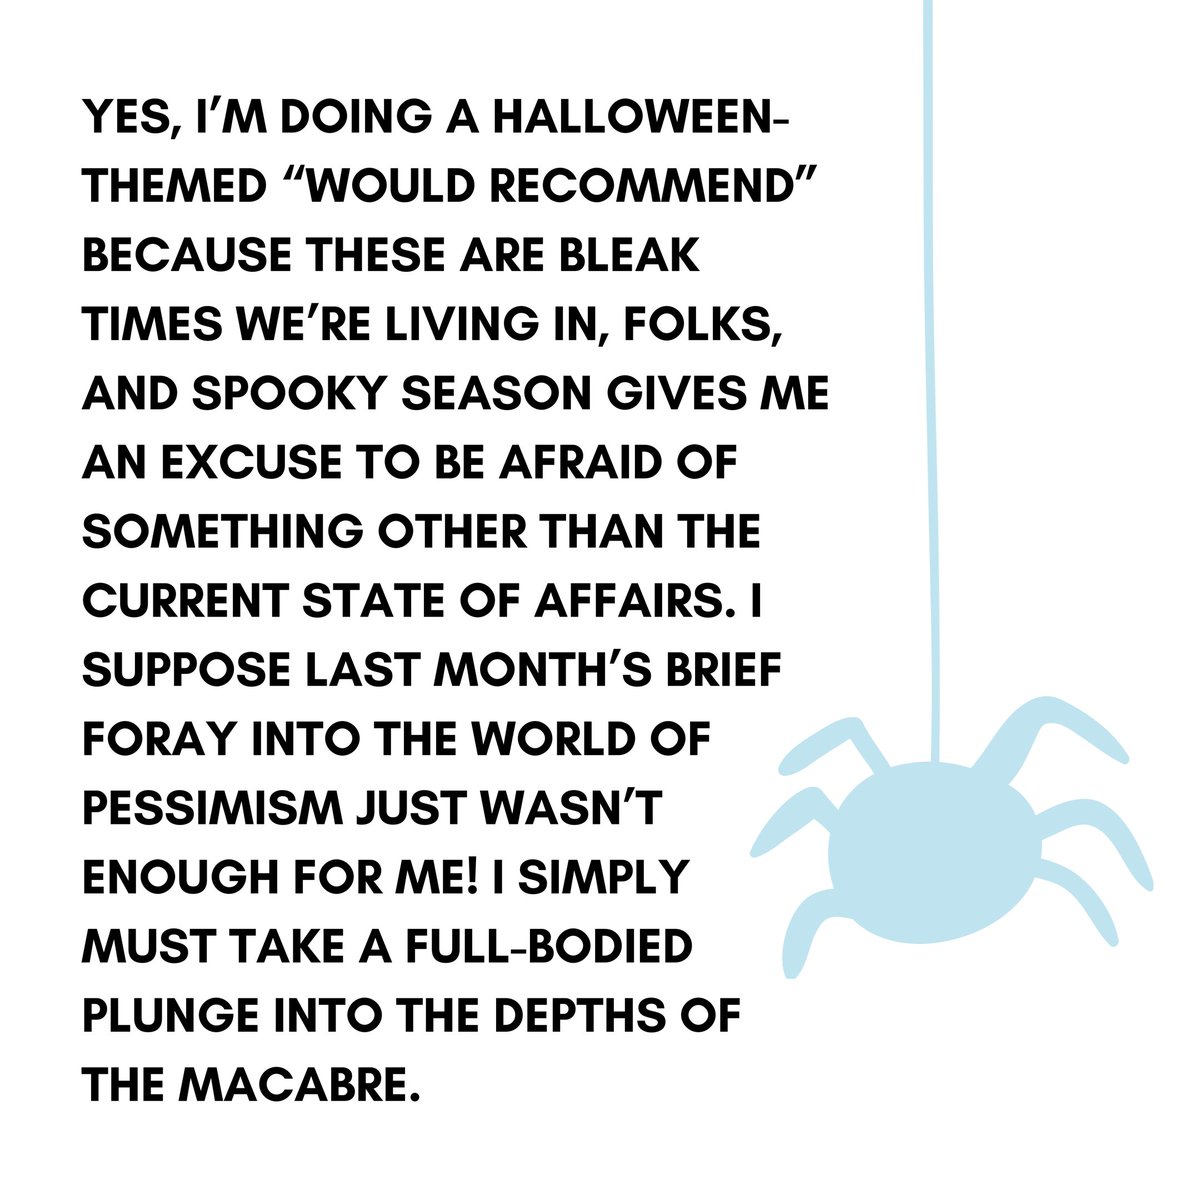 It's SPOOKY SEASON!! 🎃👻
You should always read what Gigi Silla has to say in her advice column 'Would Recommend,' but, this time, you can get an ooky spooky thrill out of it. 

#halloween #spooky #genz #generationz #advice #advicecolumn #wouldrecommend